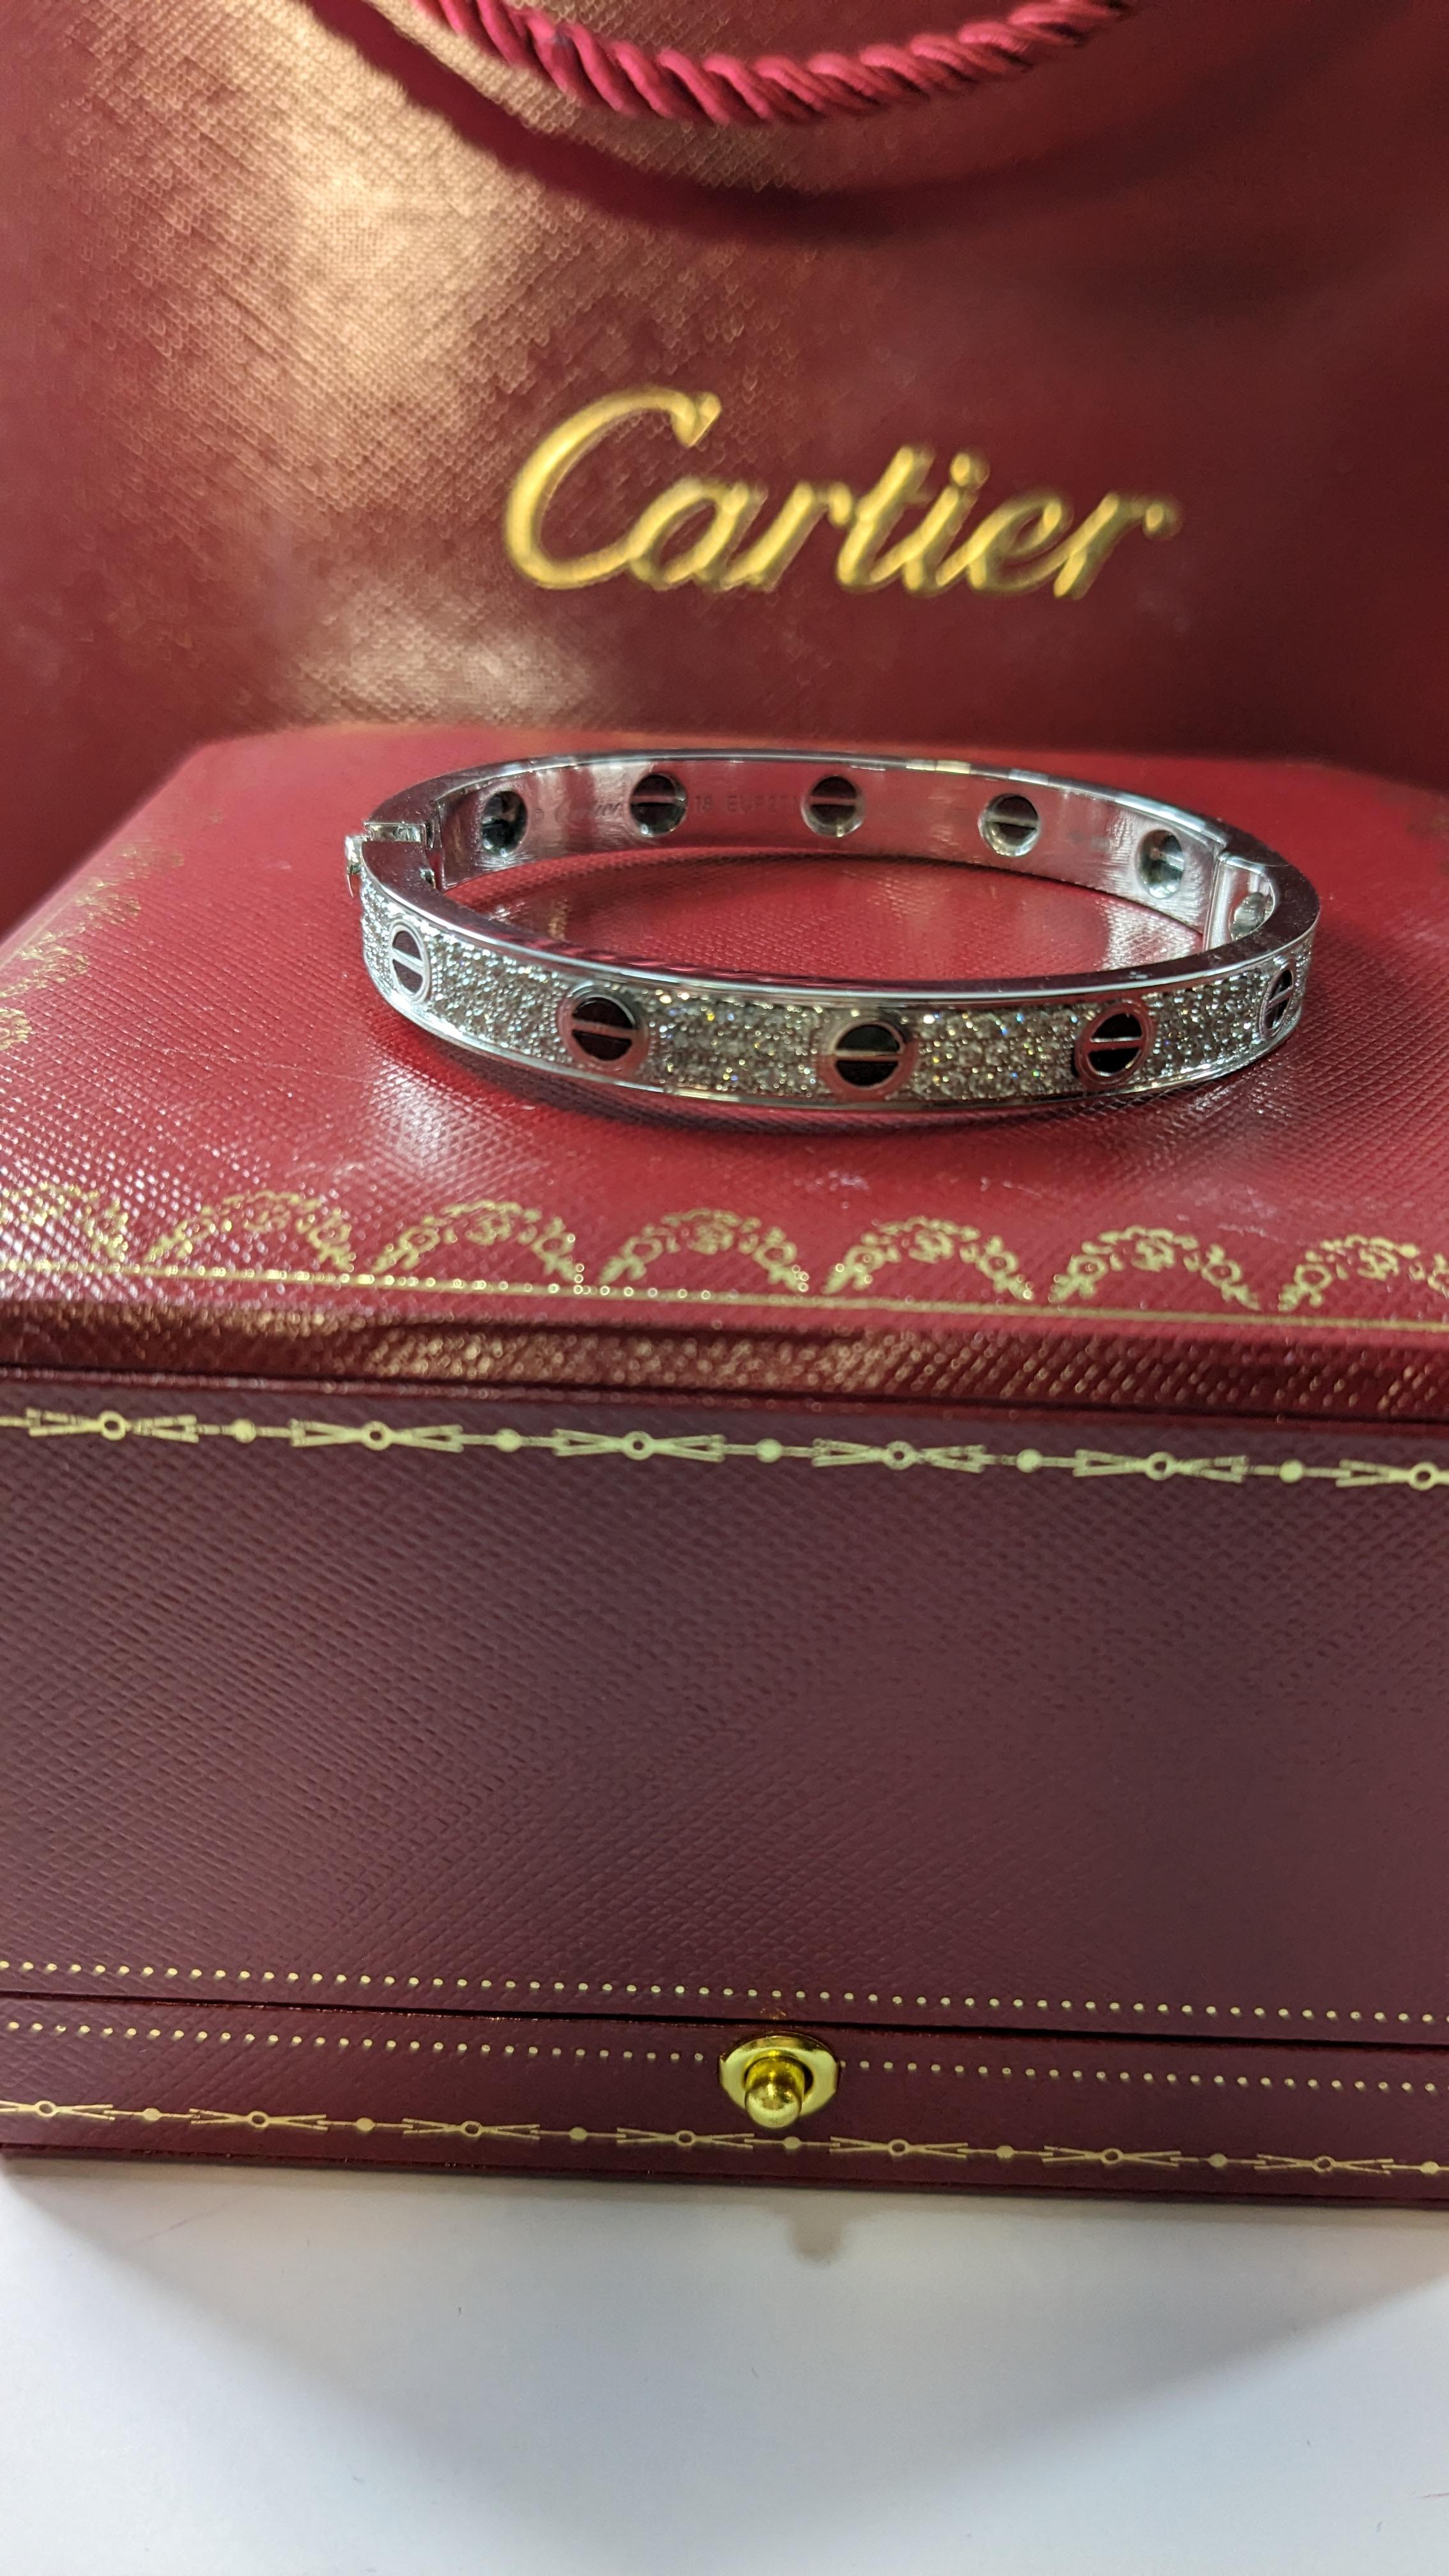 CARTIER LOVE BRACELET size 17
Cartier 'Love' bangle bracelet crafted in 18 karat white gold with diamond screw tops and pave set round brilliant cut diamonds (D-F in color, VVS clarity), ceramique noir
Signed Cartier 750, with serial number and